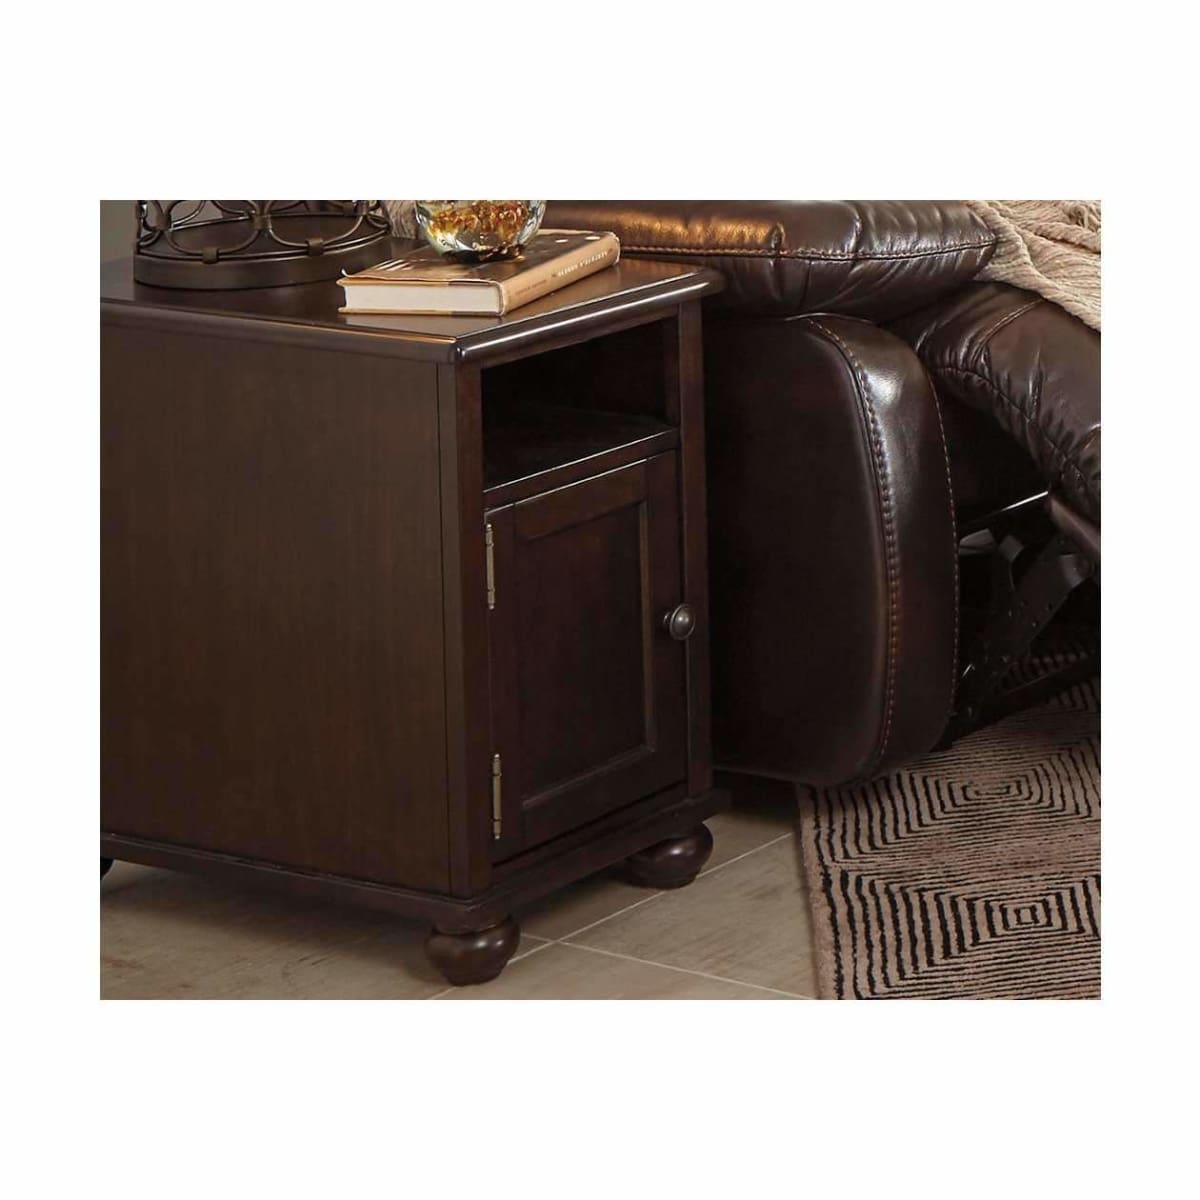 Barilanni Chairside End Table - END TABLE/SIDE TABLE